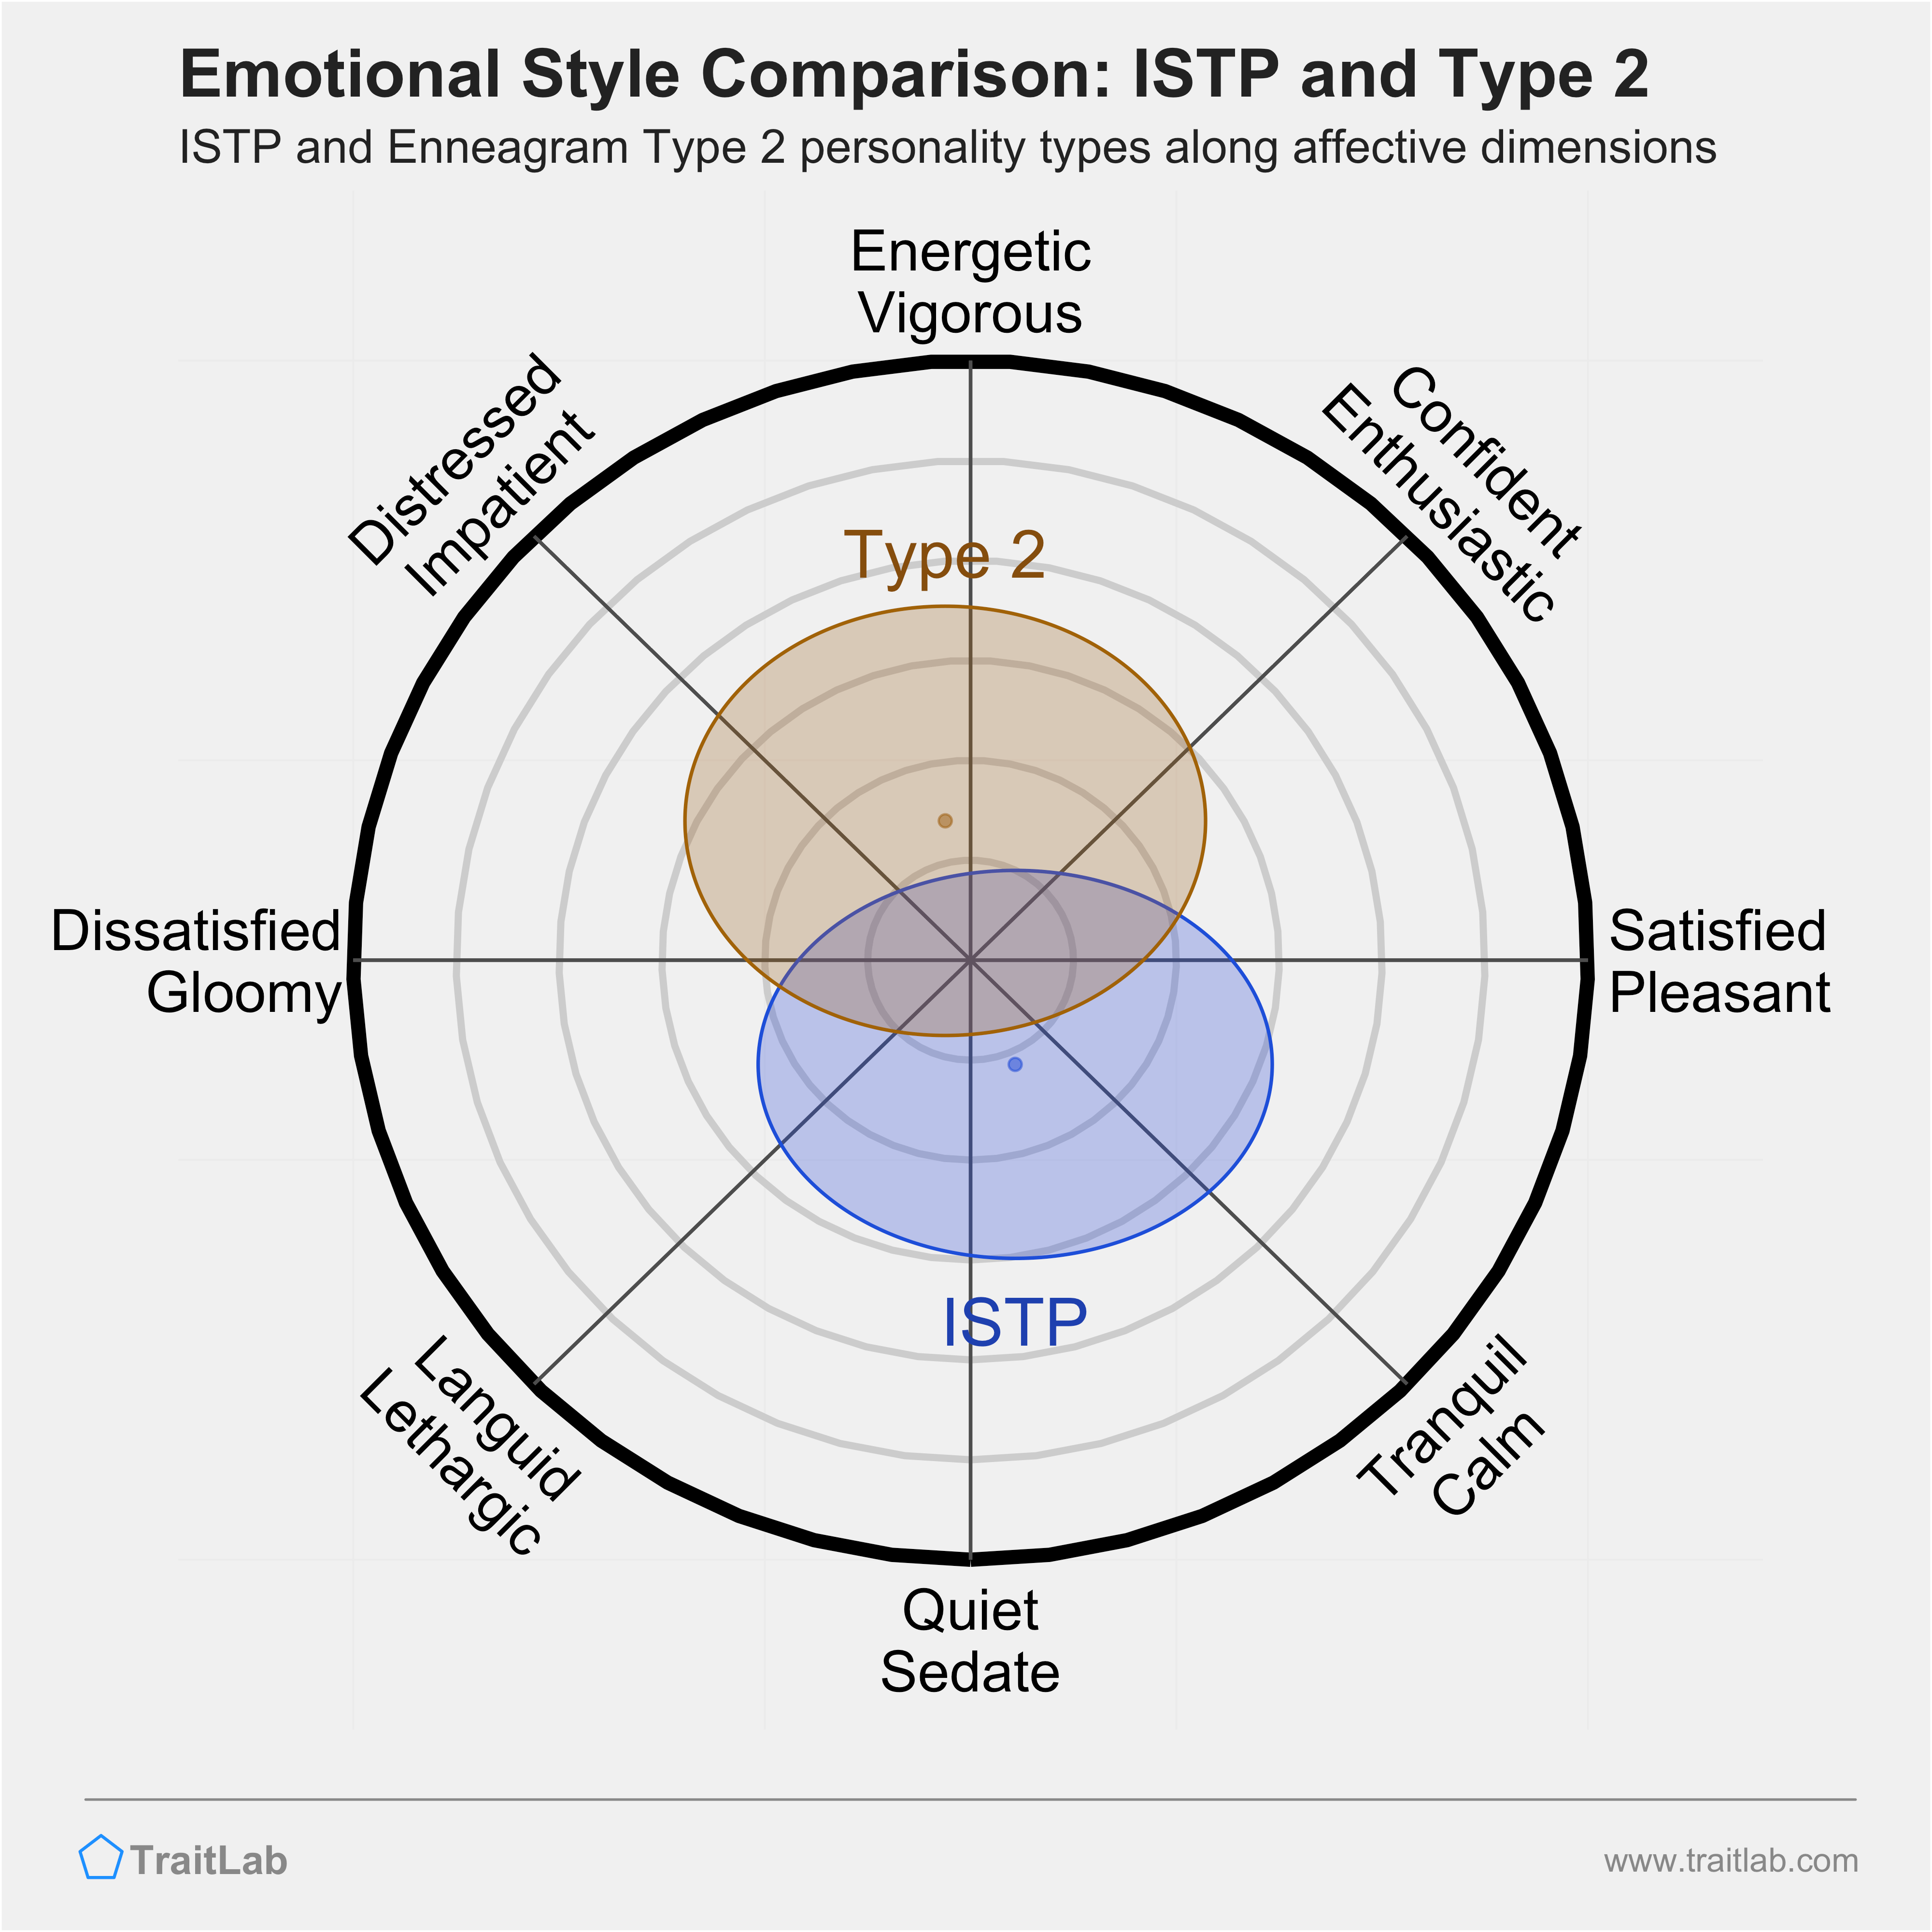 ISTP and Type 2 comparison across emotional (affective) dimensions